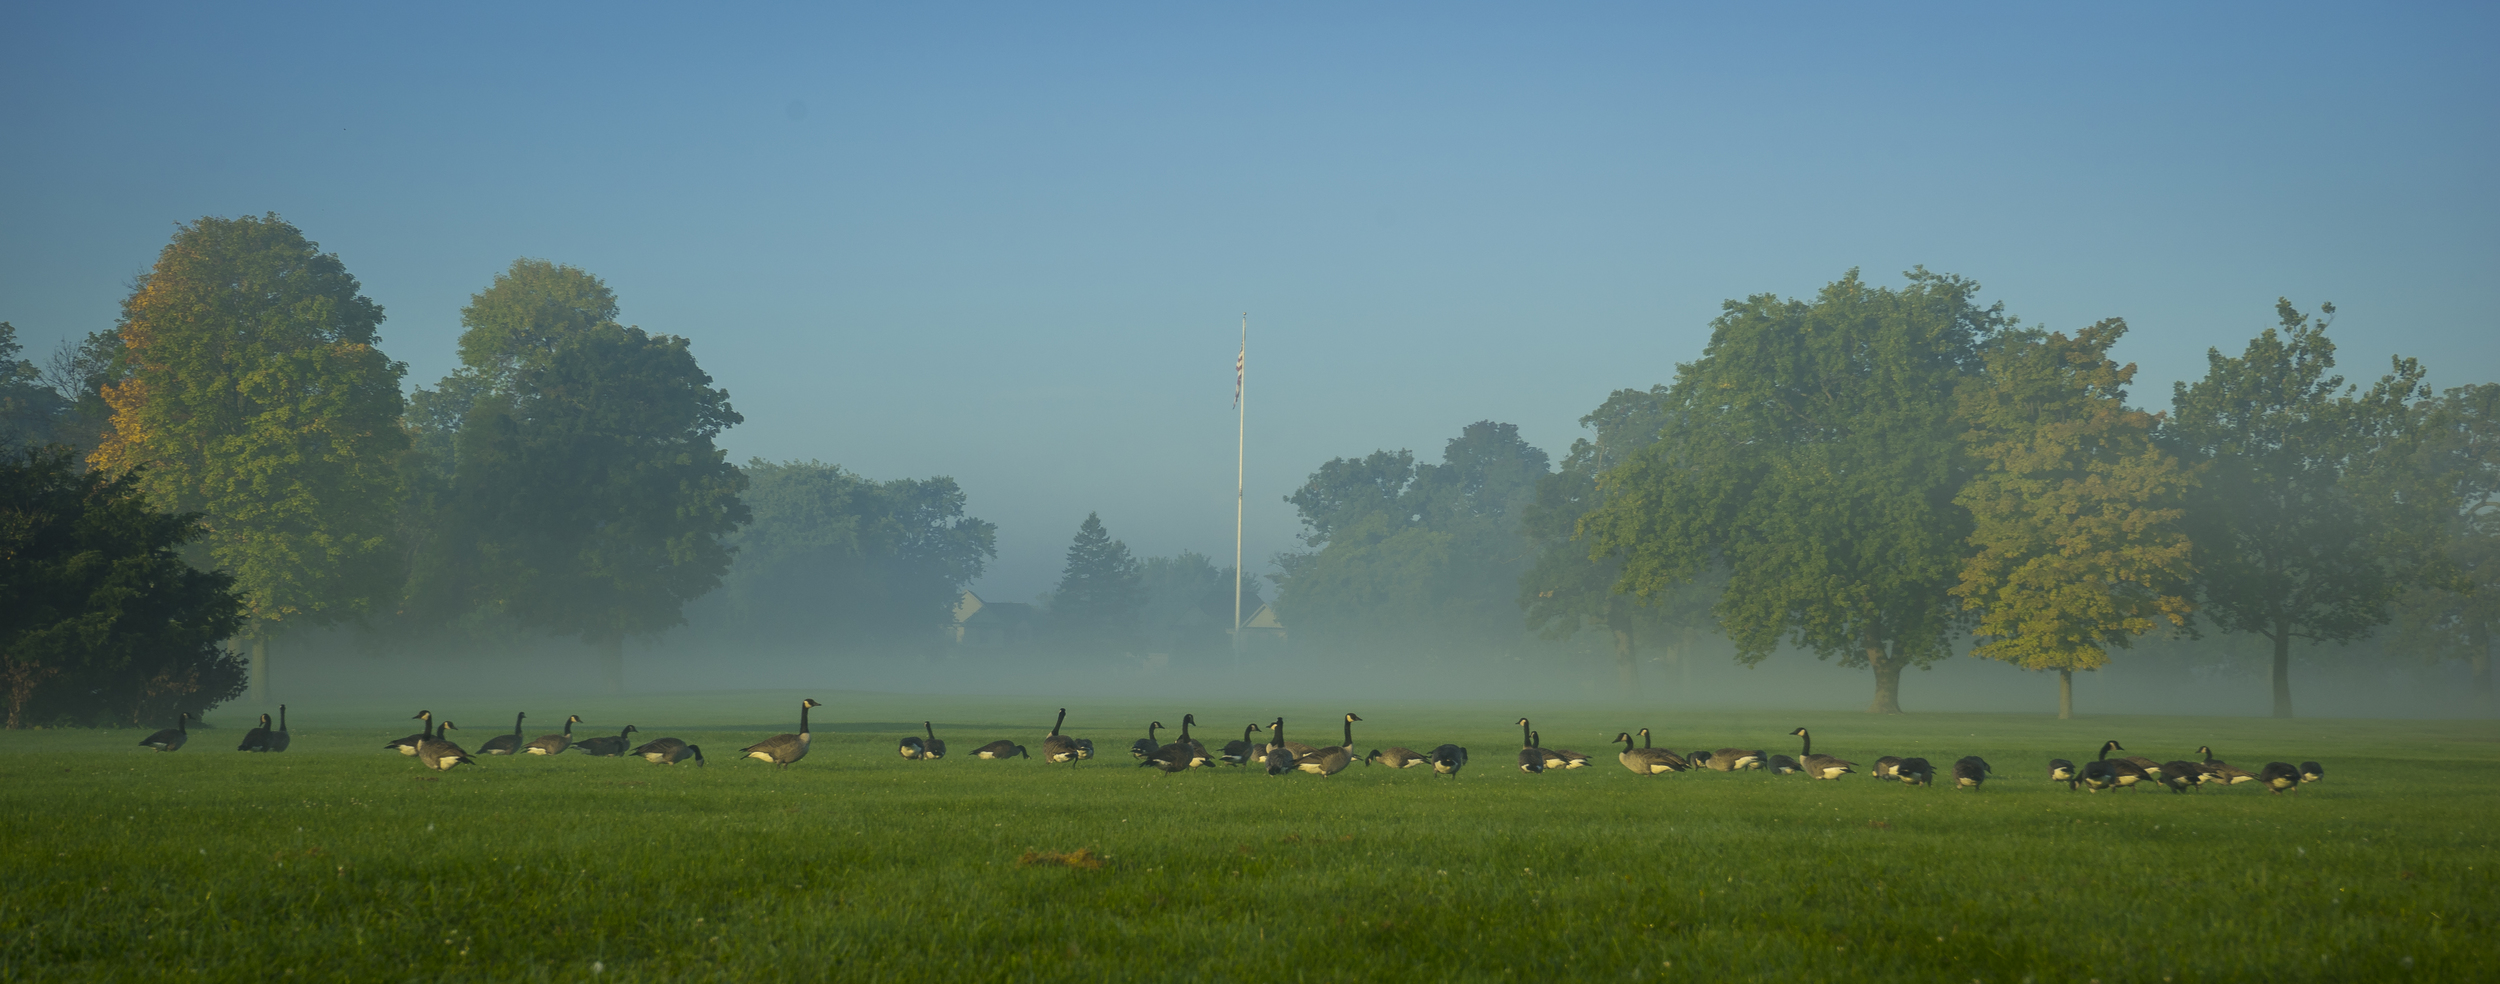 The Geese on the Parade Grounds